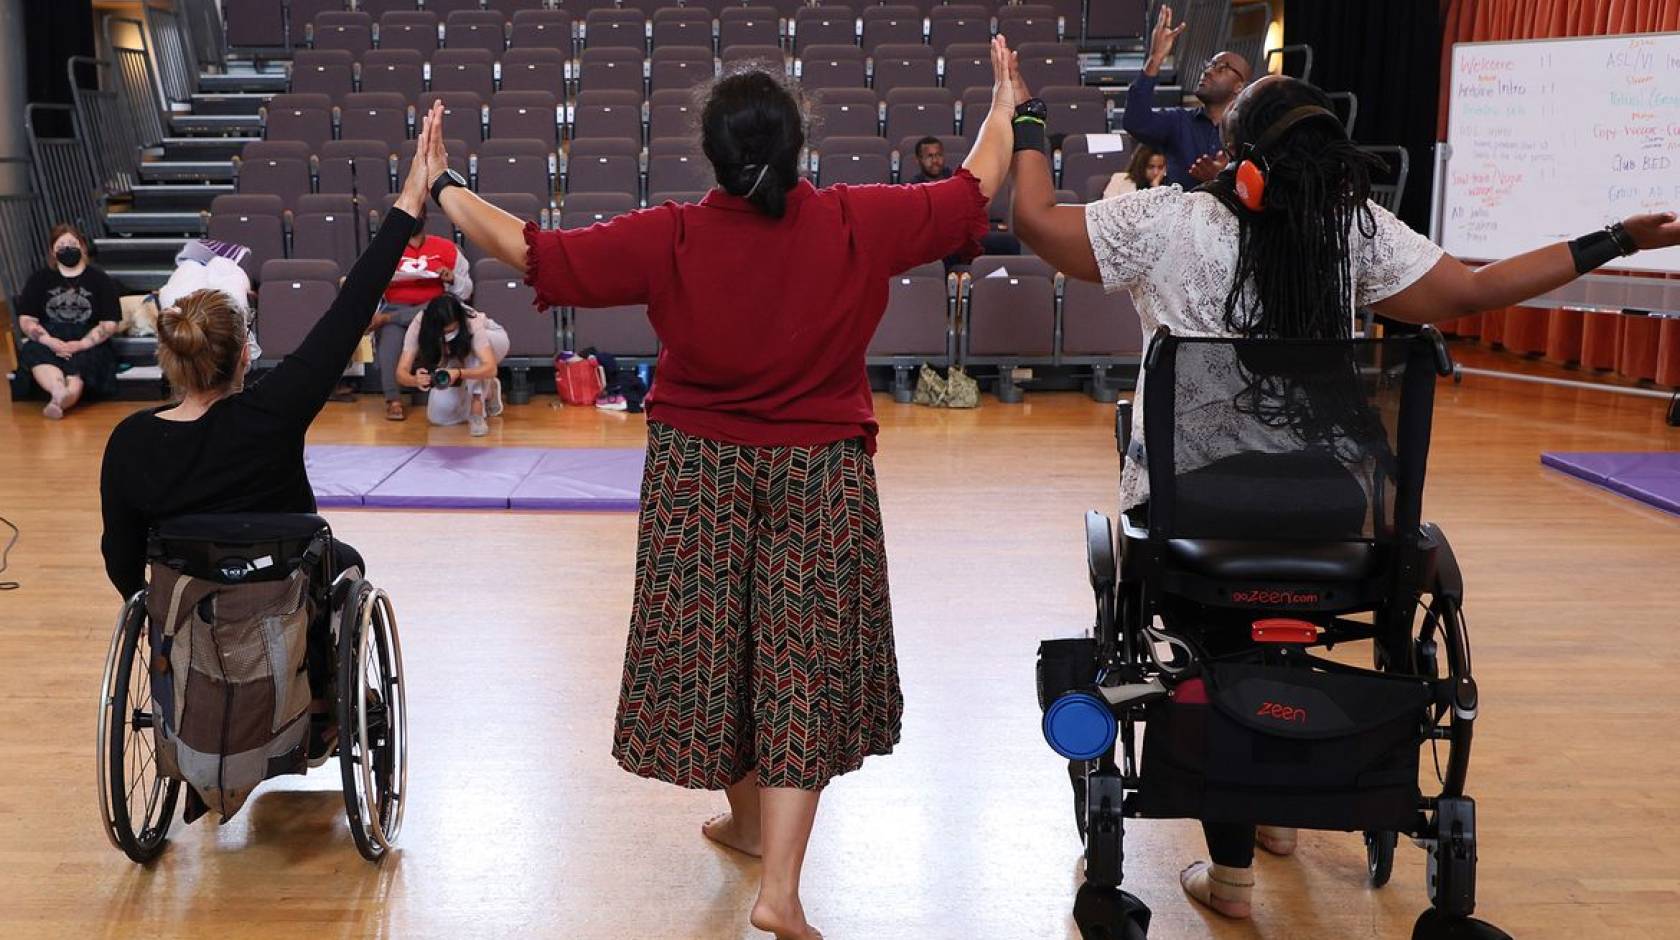 Three disabled dancers, photographed from behind, touch hands while raising their arms.